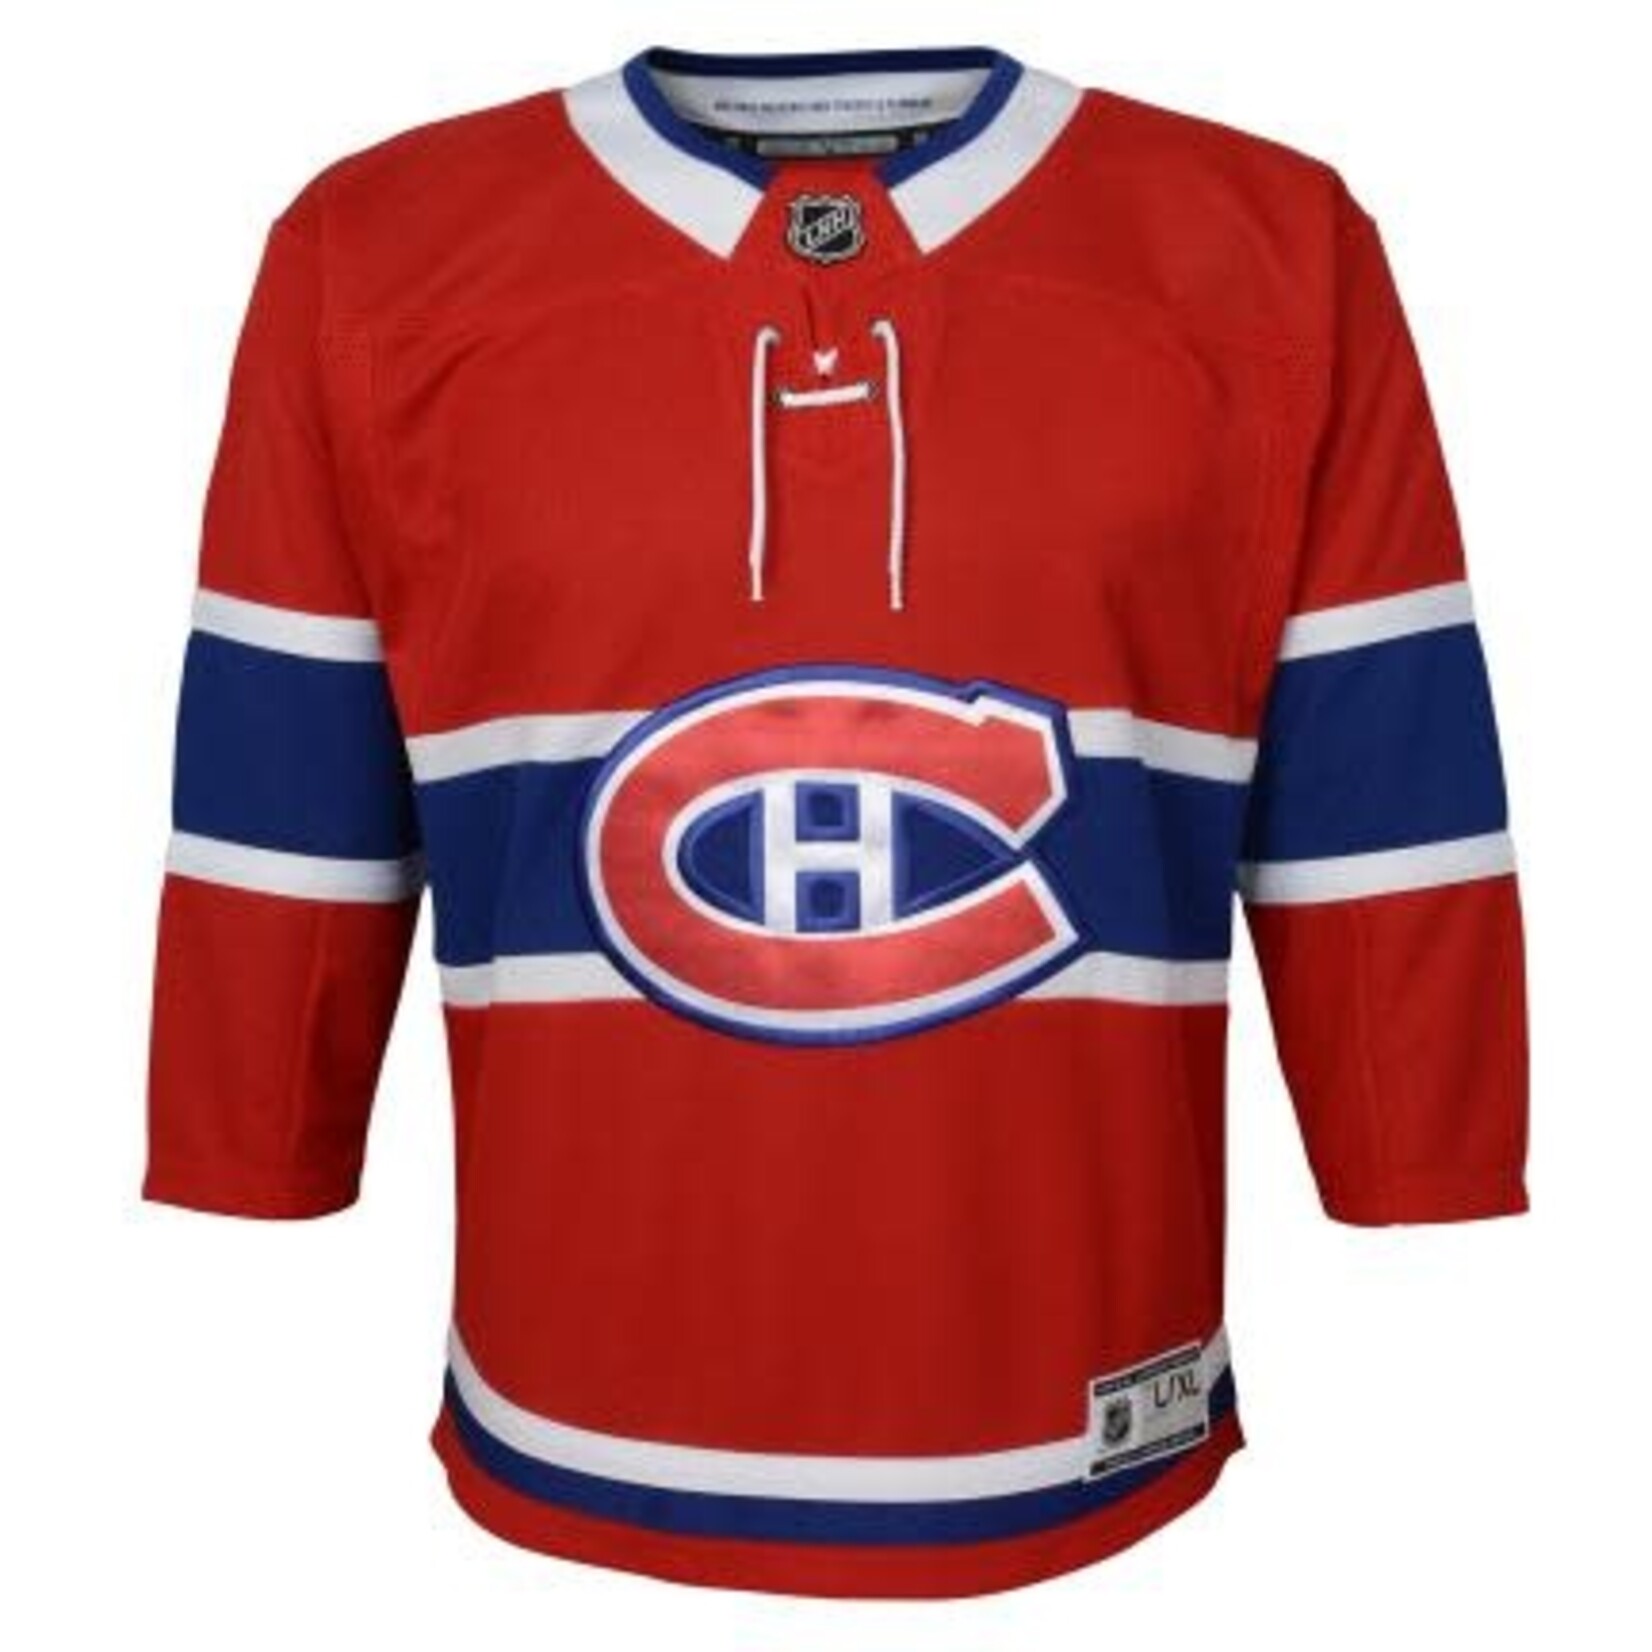 Outerstuff Outerstuff Hockey Jersey, Replica, Home, NHL, Youth, Montreal Canadiens